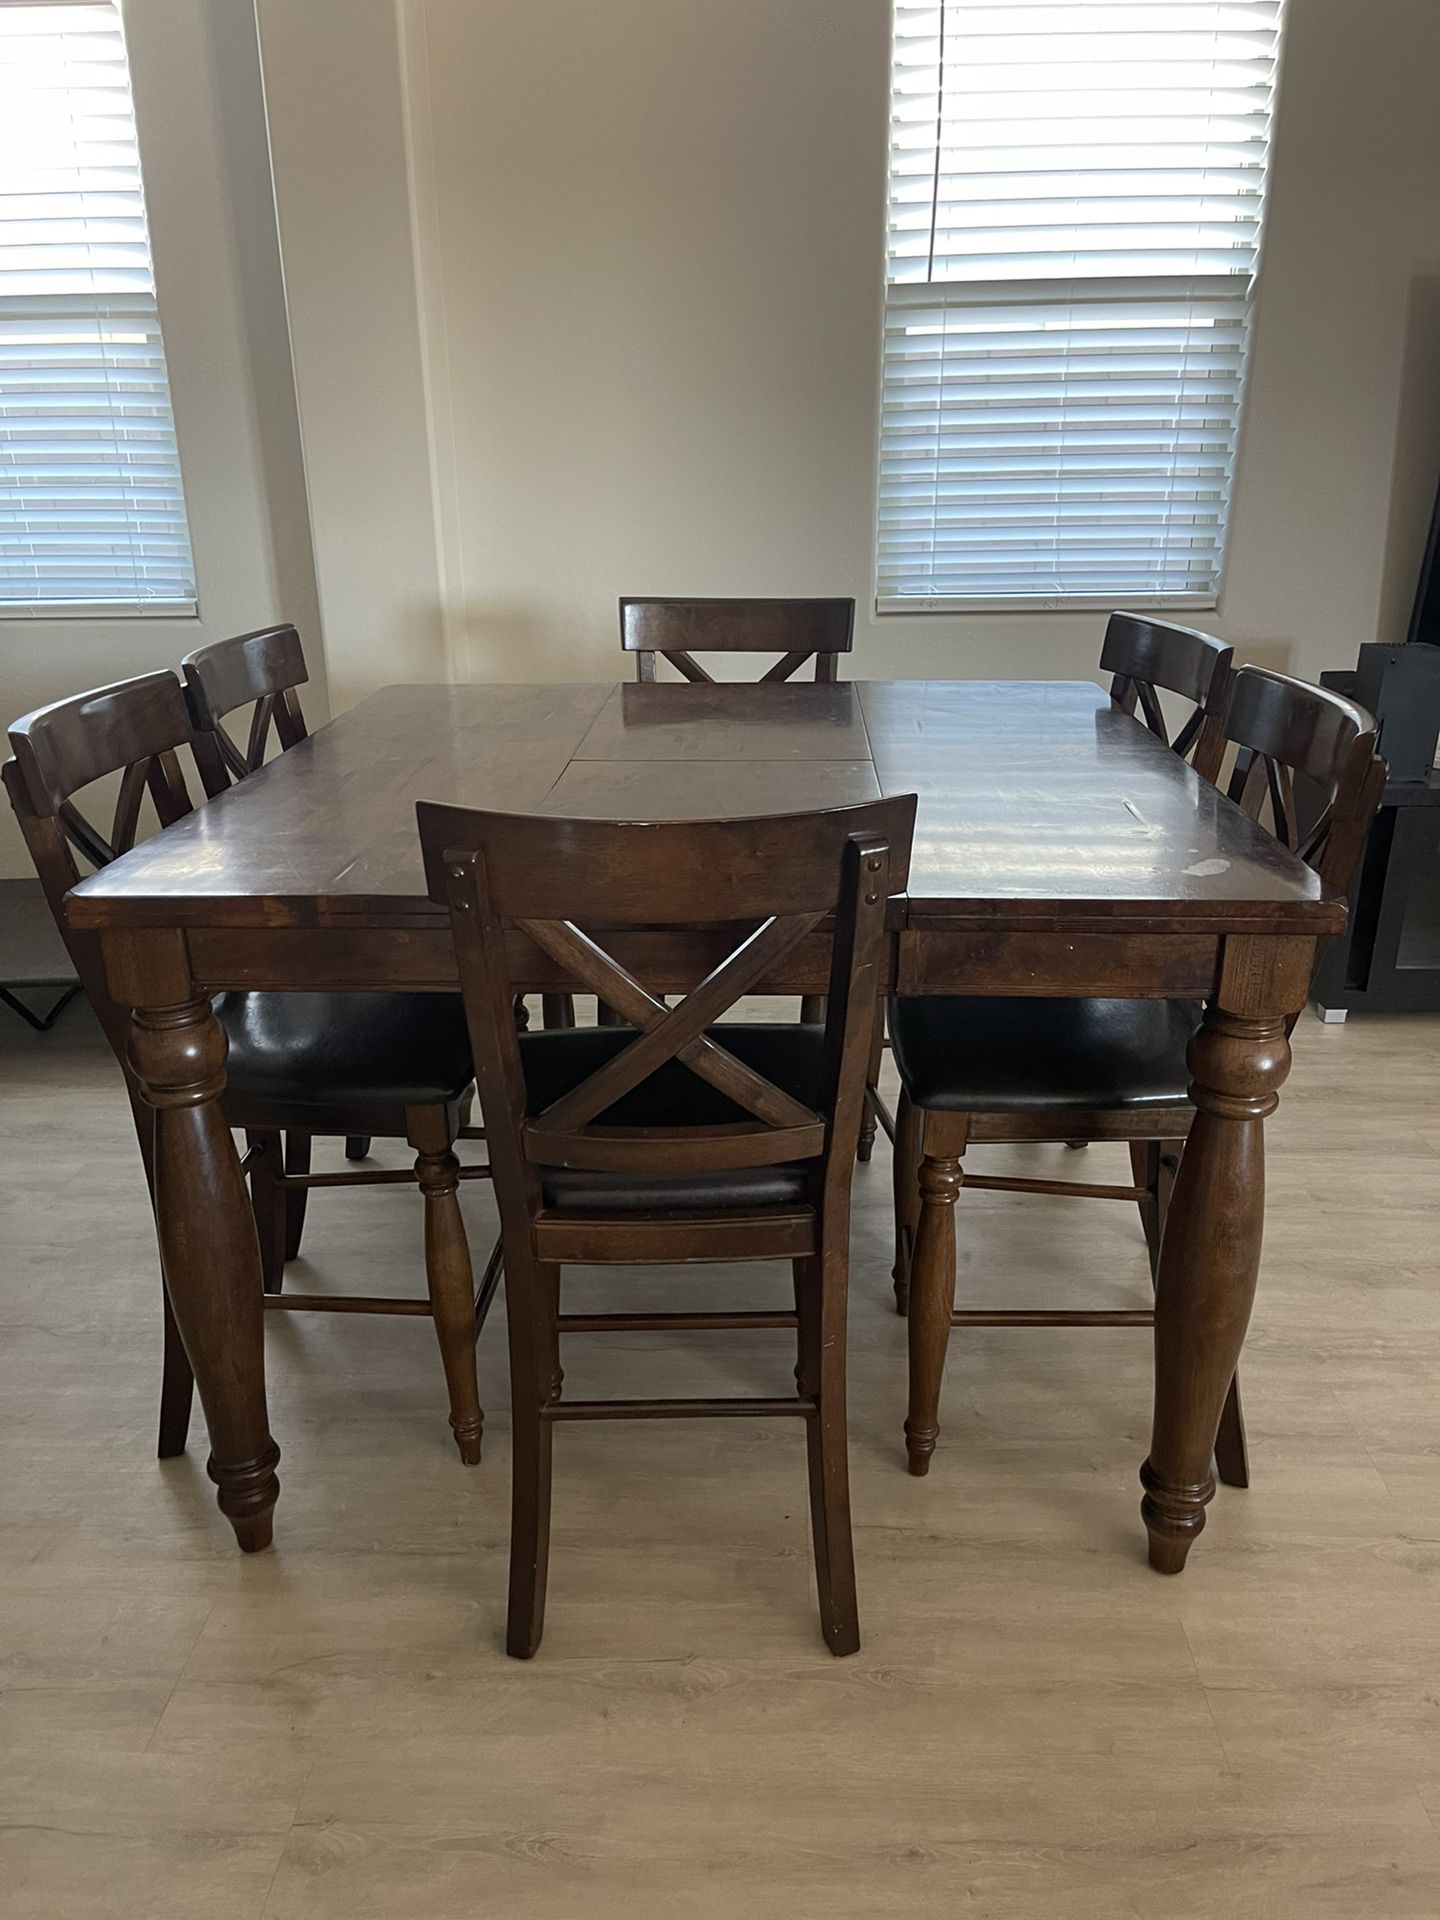 Dining Room Table With 6 Chairs